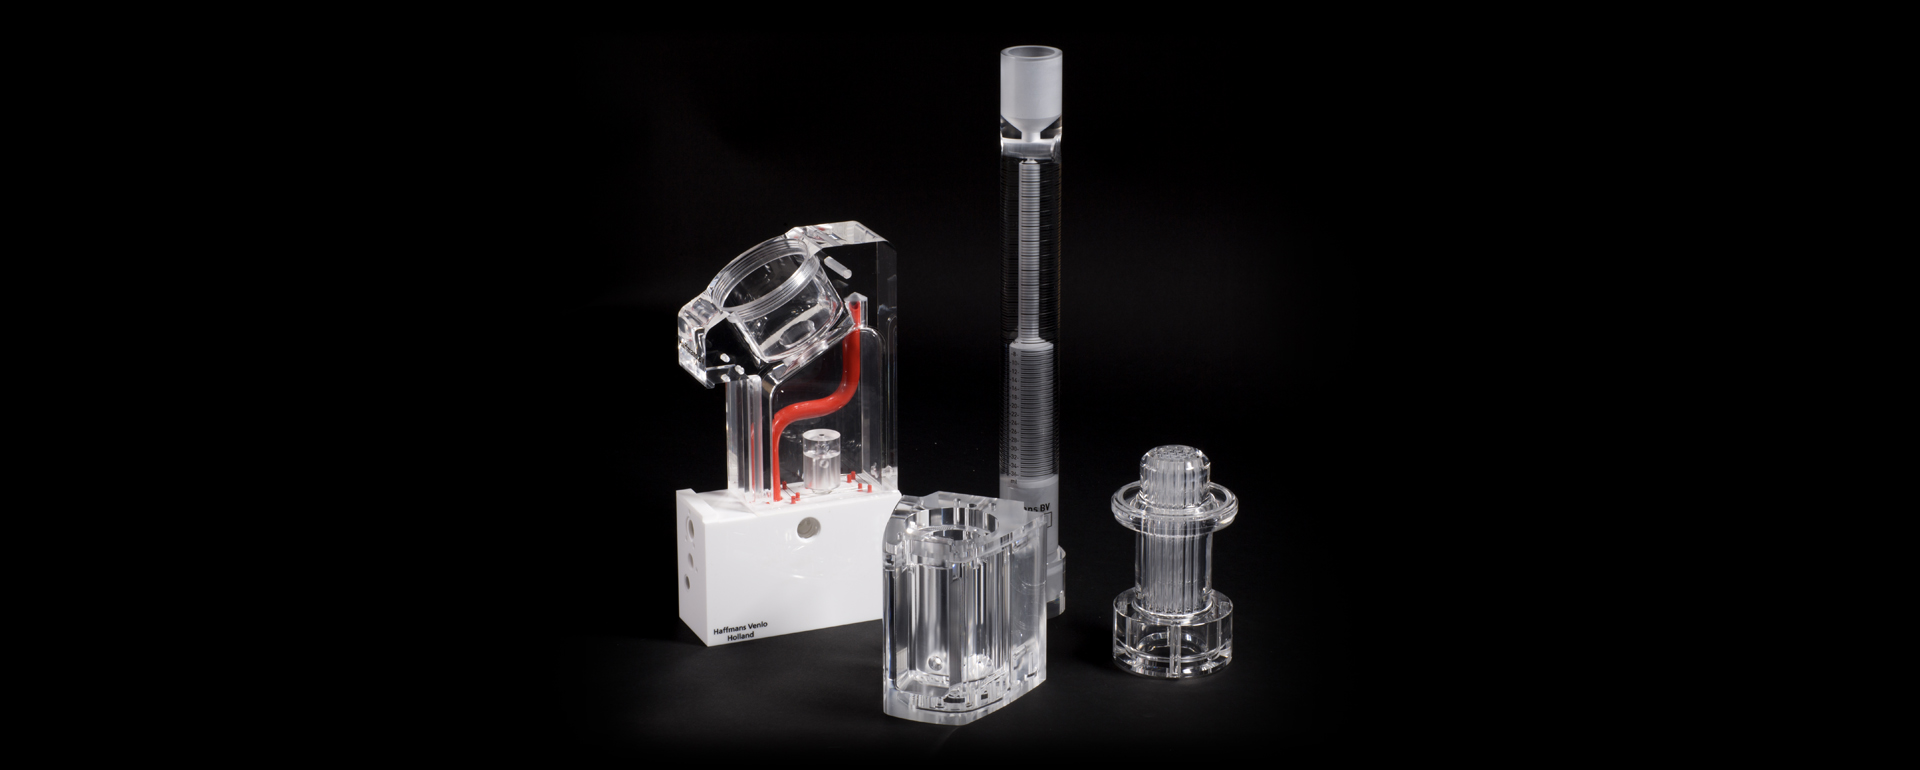 Precision machined acrylic liquid testing & analysis devices